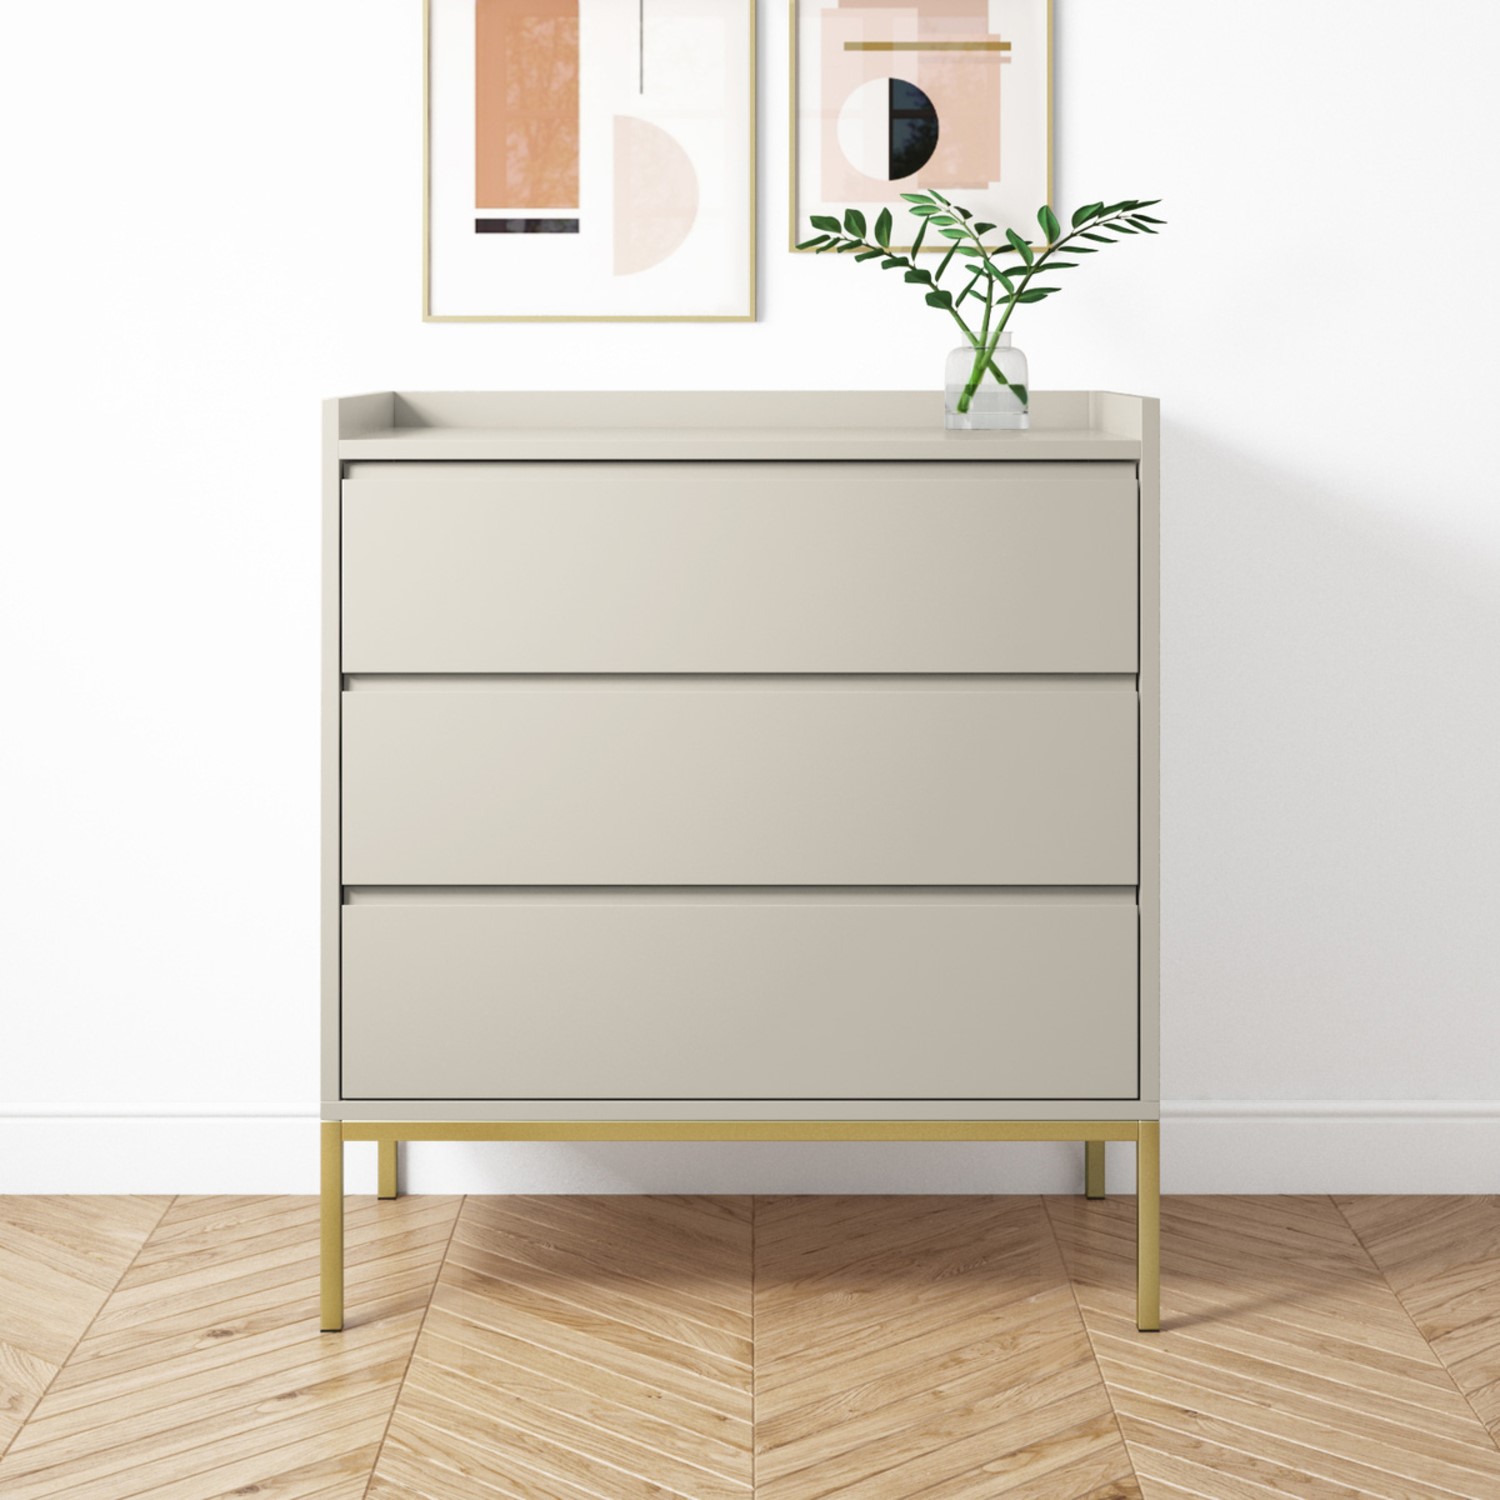 Photo of Beige modern chest of 3 drawers with legs - zion